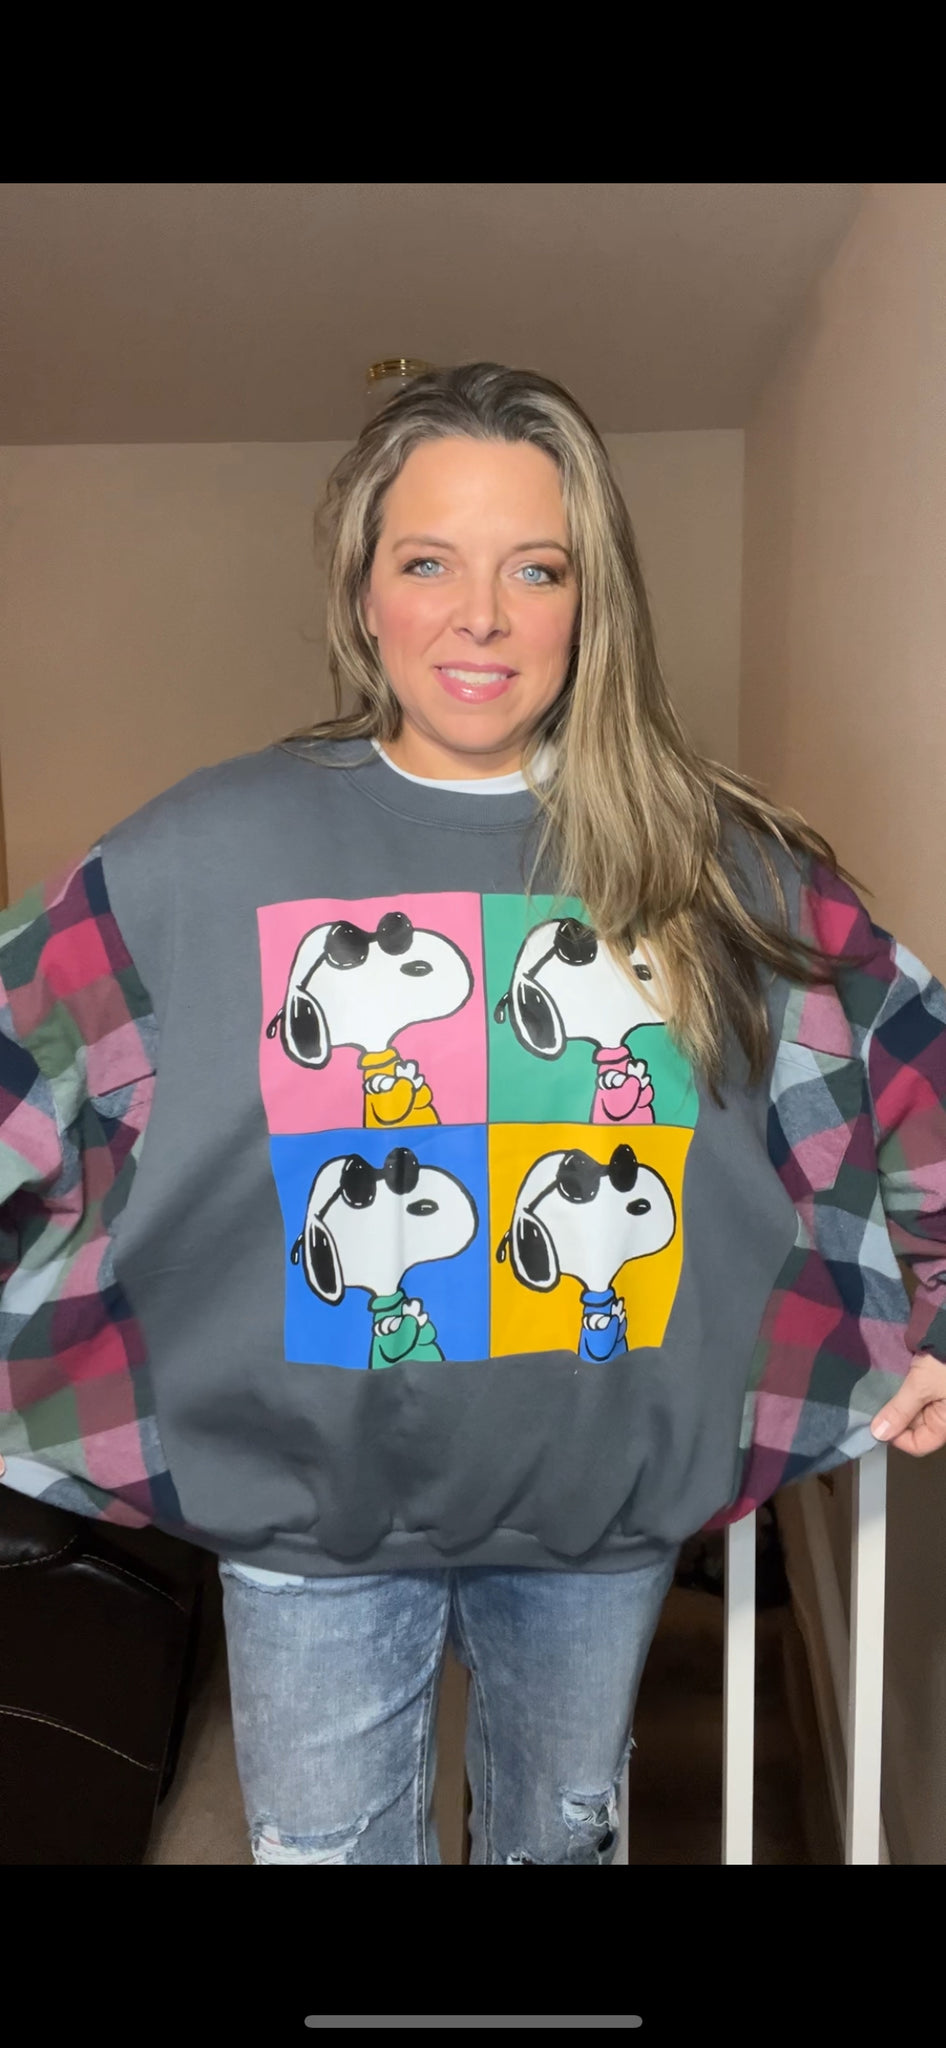 Snoopy - women’s XL/1X – midweight sweatshirt with flannel sleeves ￼